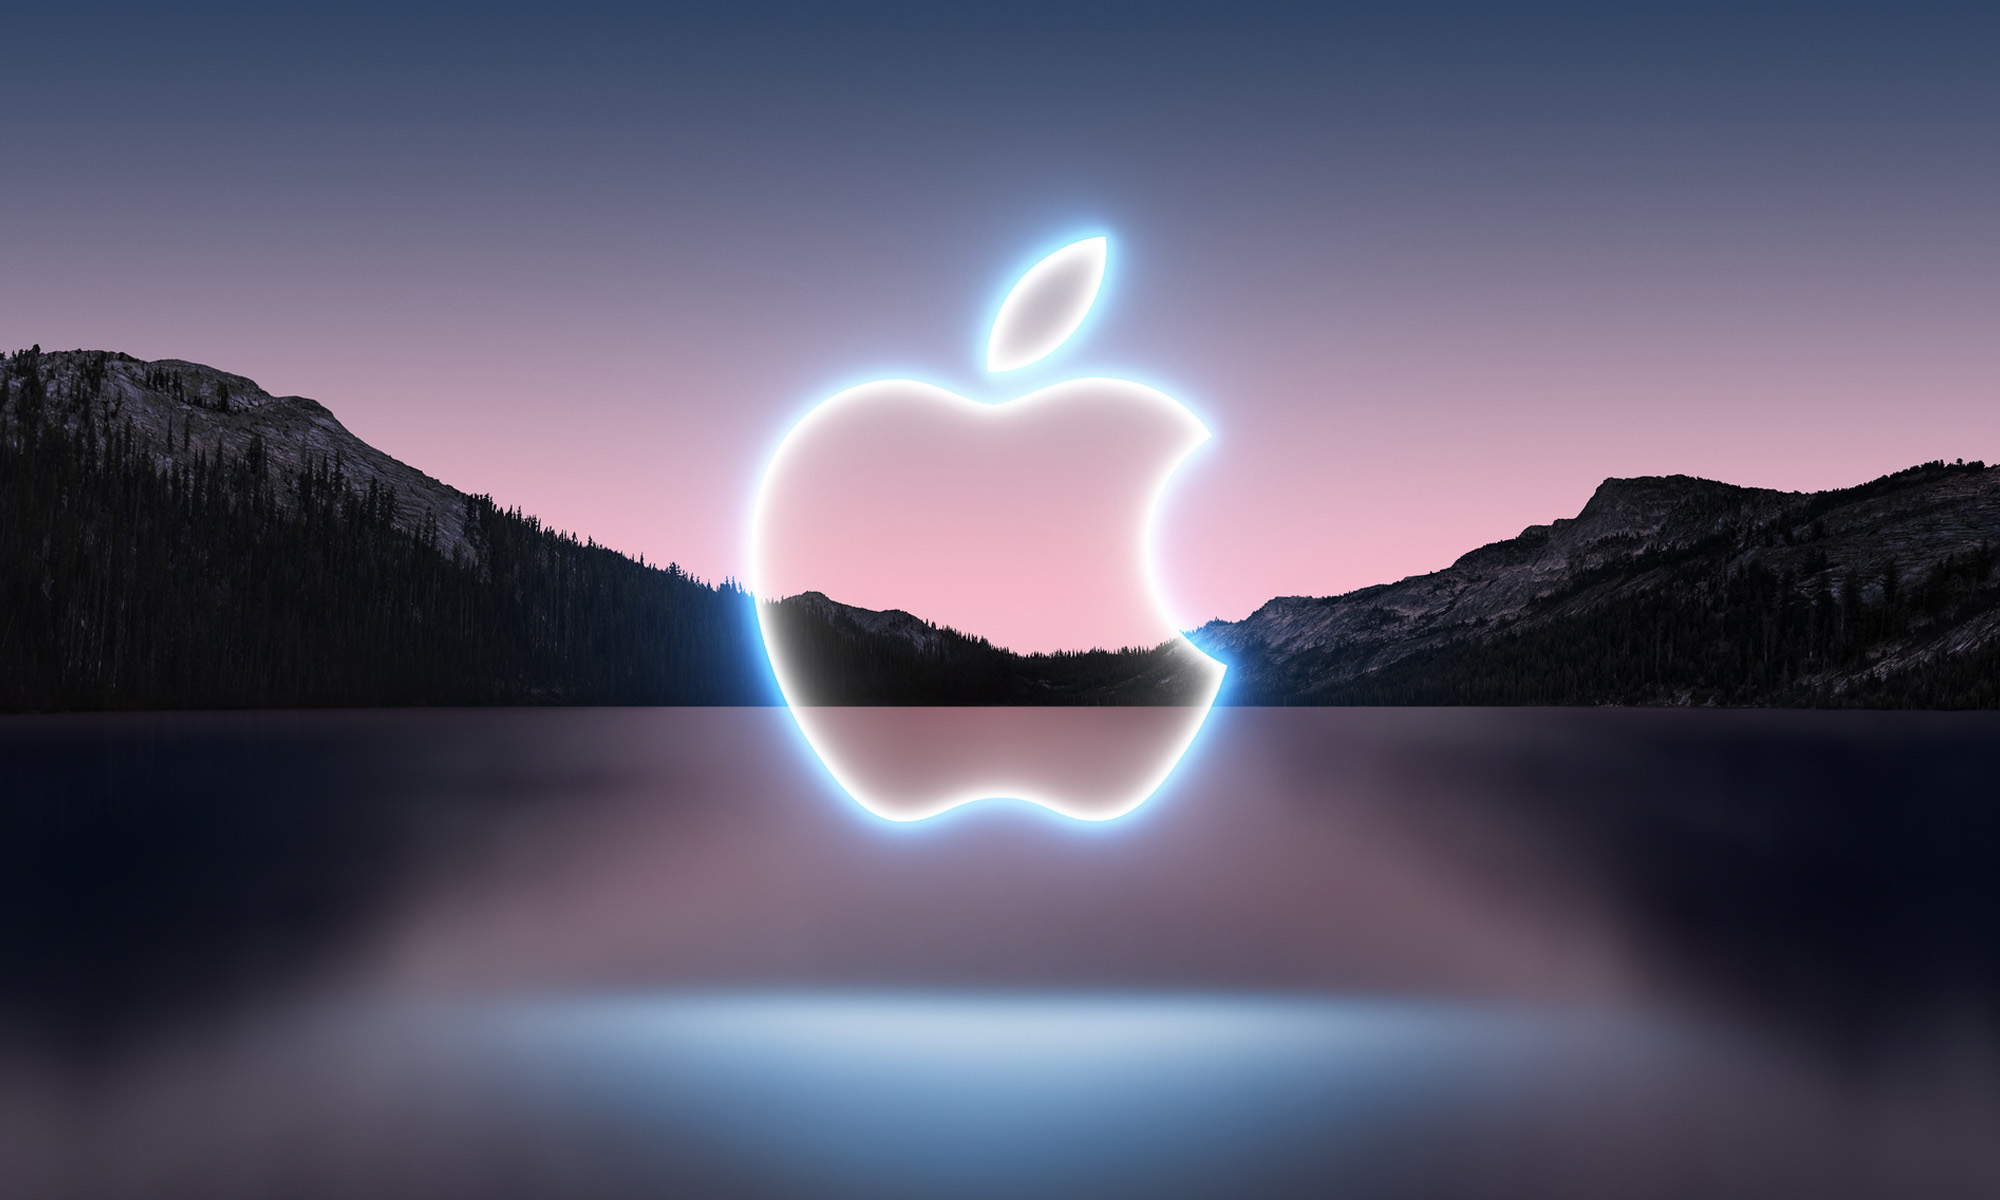 apple's california streaming is set to take place on september 14